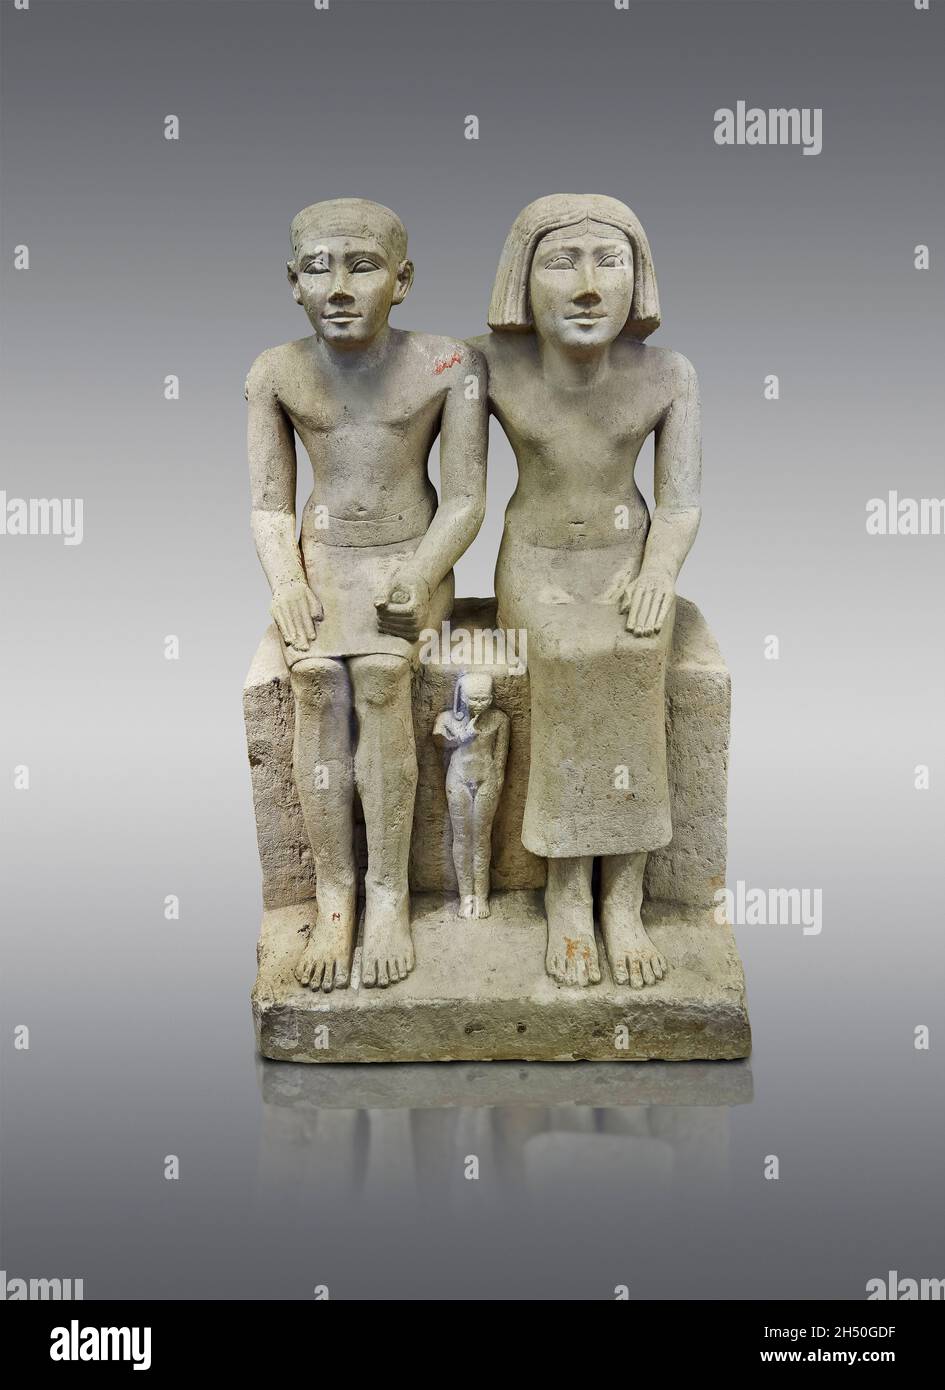 Egyptian statue sculpture of a married couple and son, 2620-2500, 4yj dynasty, limestone. Louvre Museum A44. Stock Photo